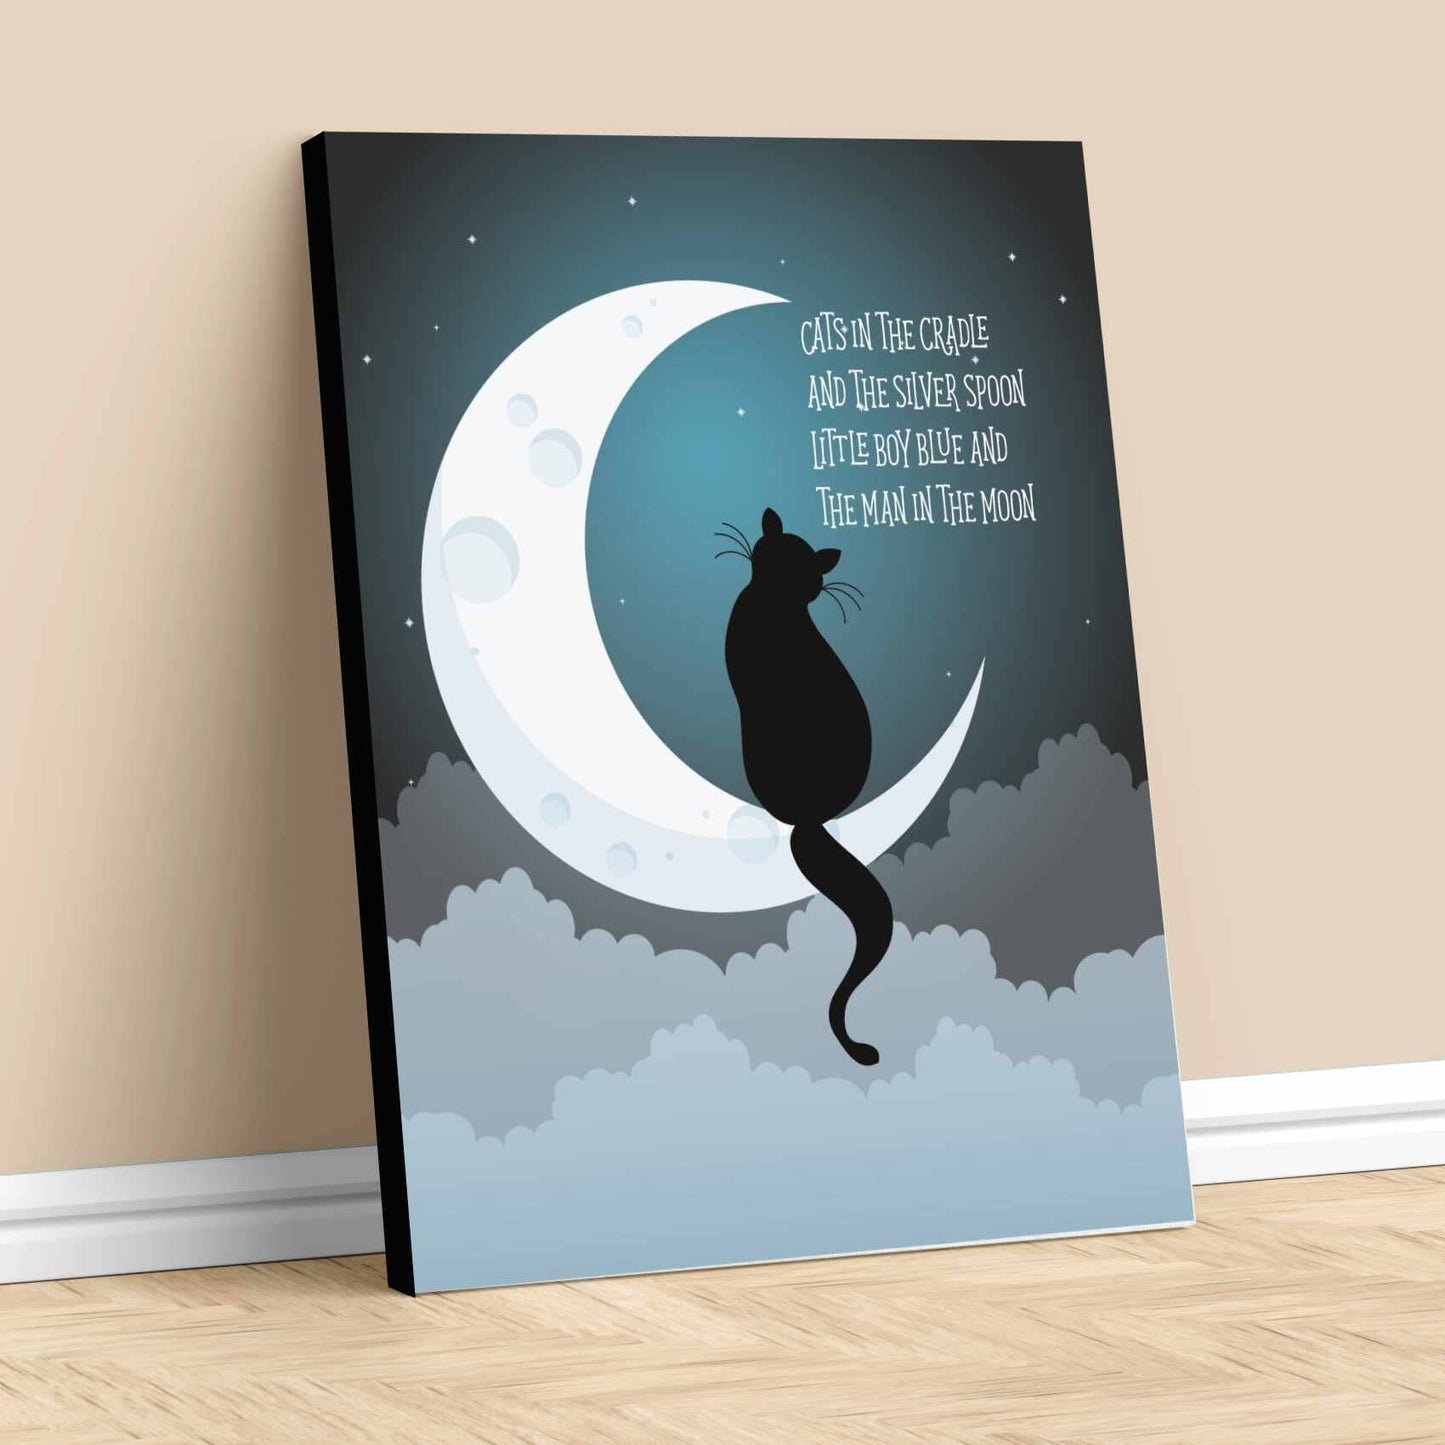 Cats in the Cradle by Harry Chapin - Children's 70s Lyric Art Song Lyrics Art Song Lyrics Art 11x14 Canvas Wrap 